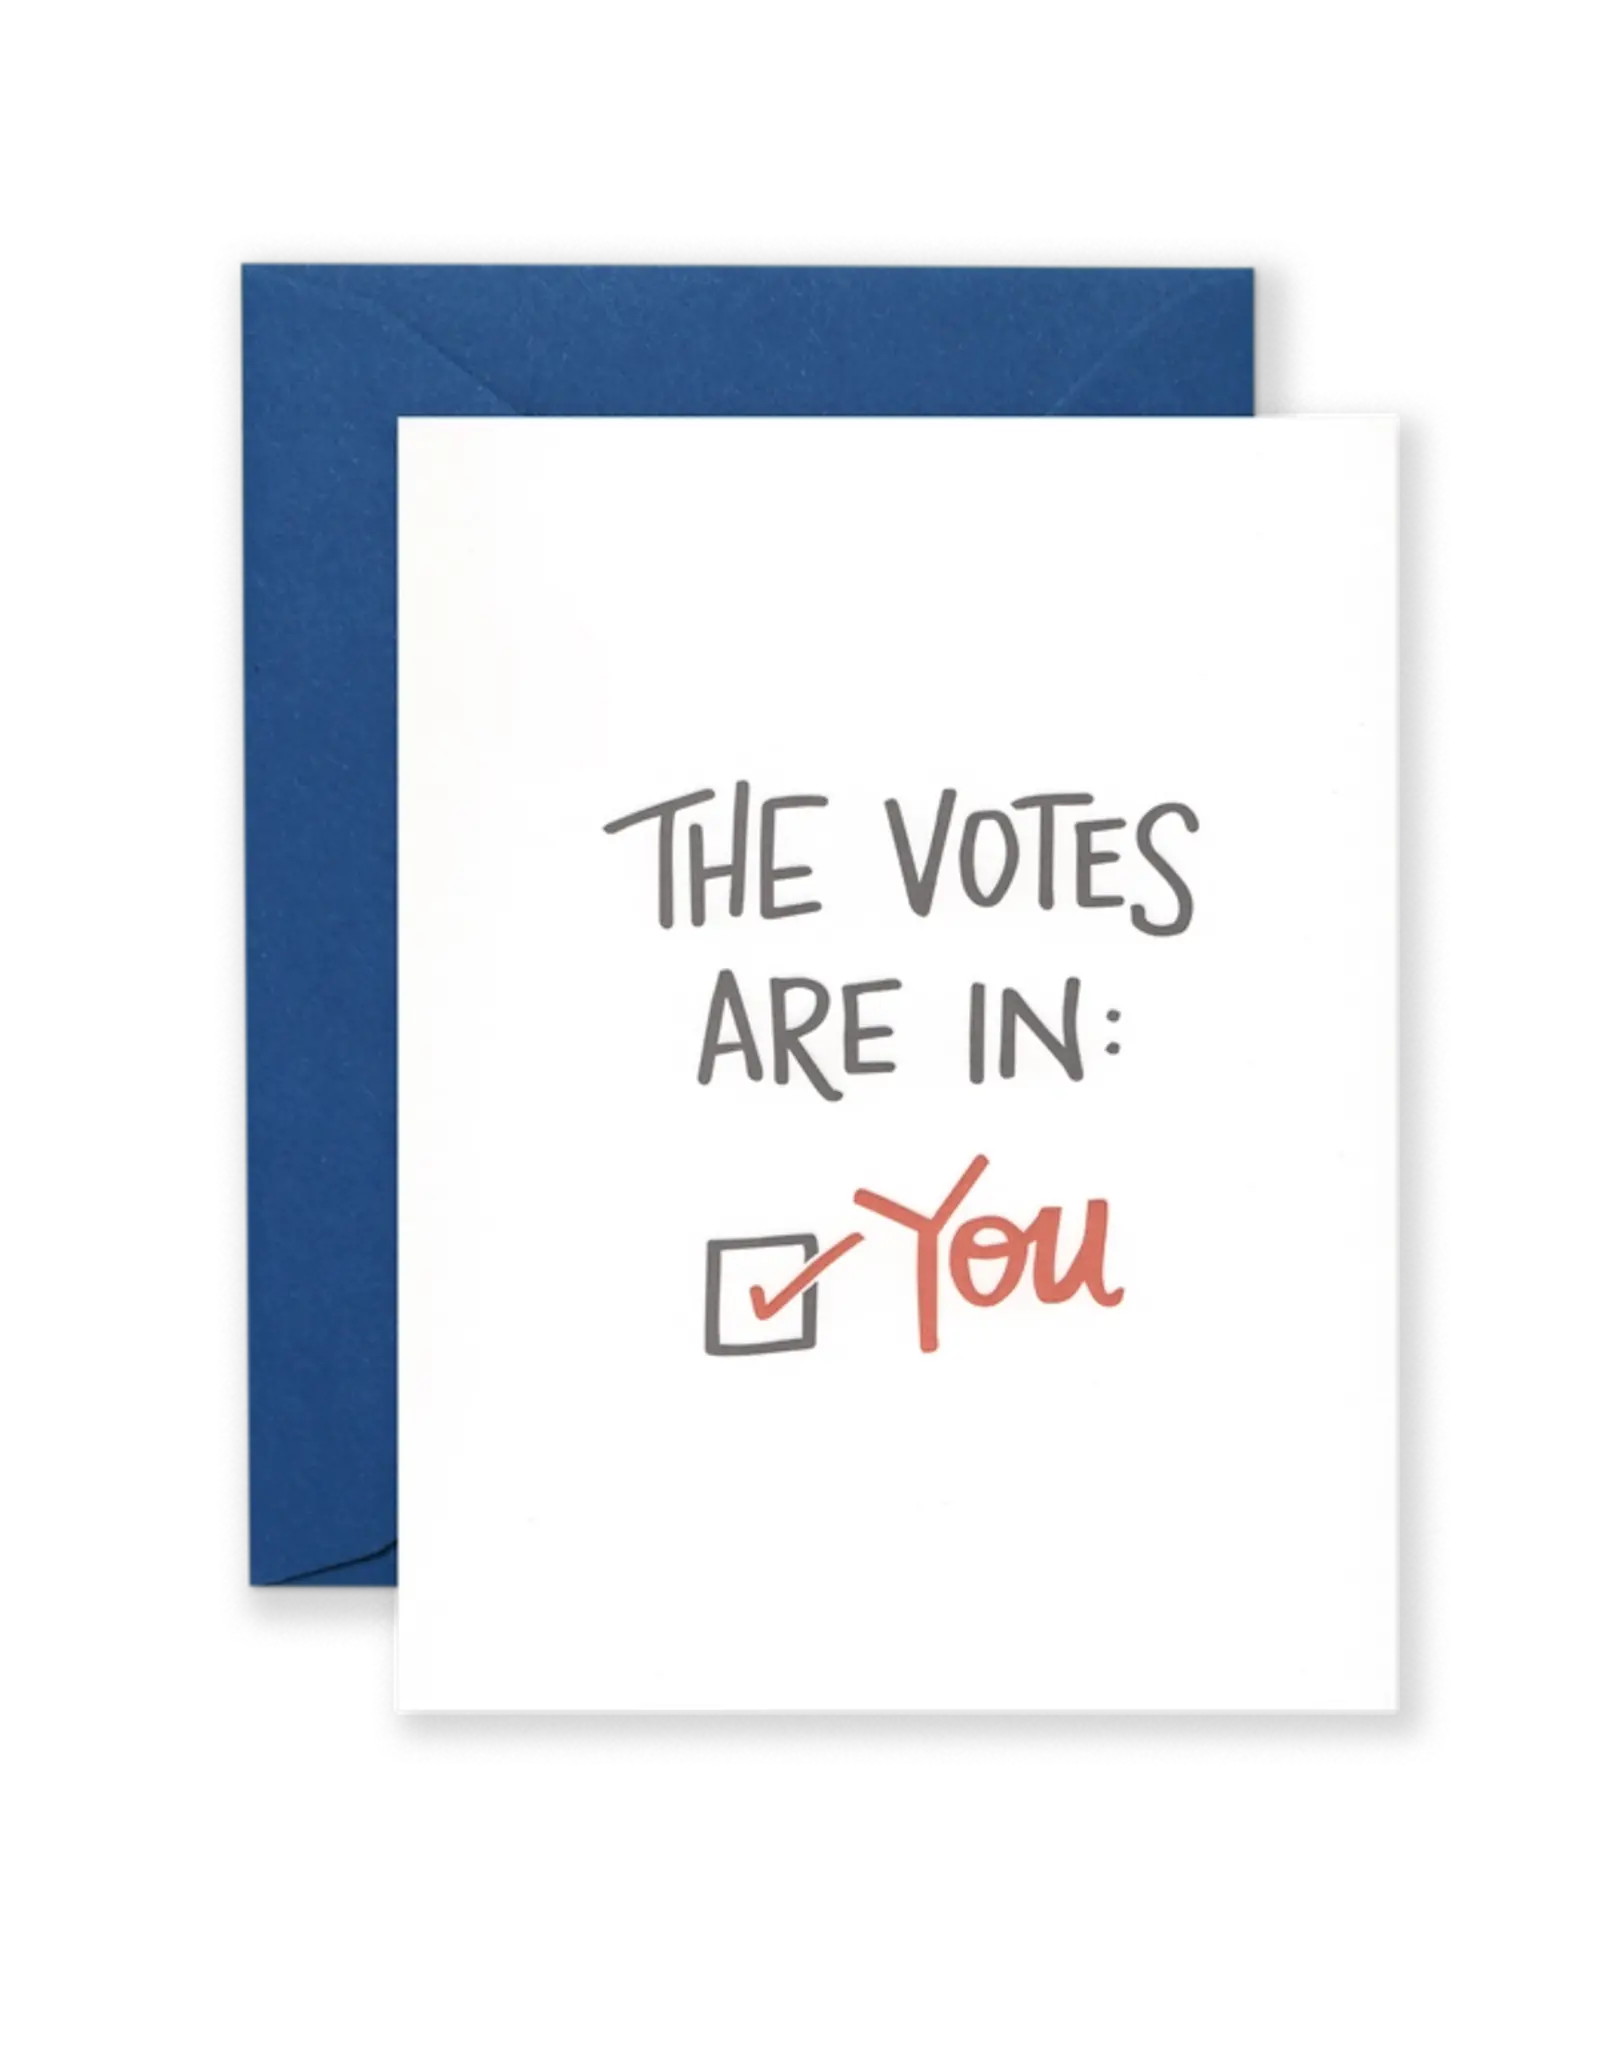 Lionheart Prints Card - Love: The Votes are in! (You!)